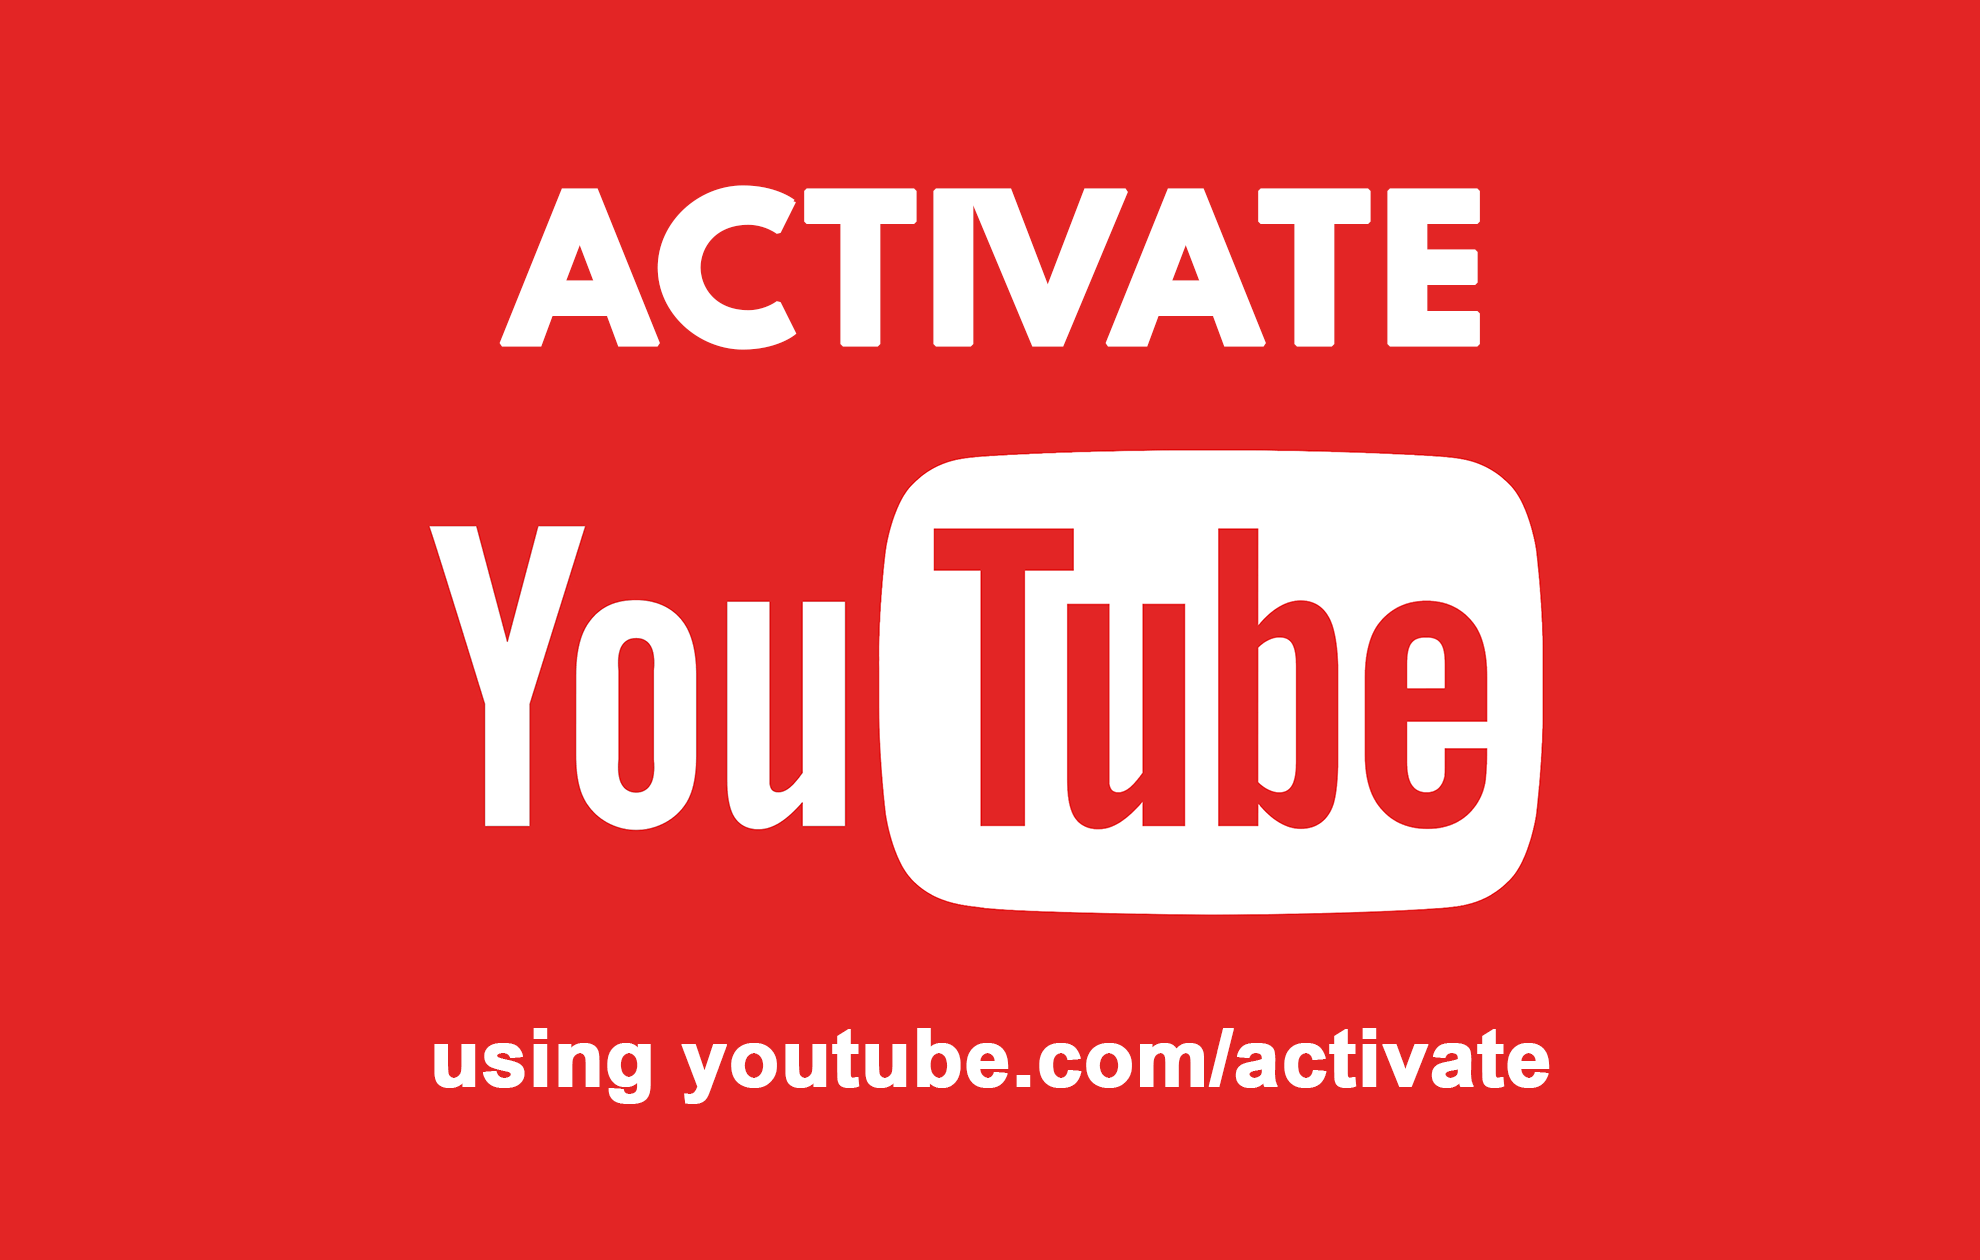 Reactivate youtube tv